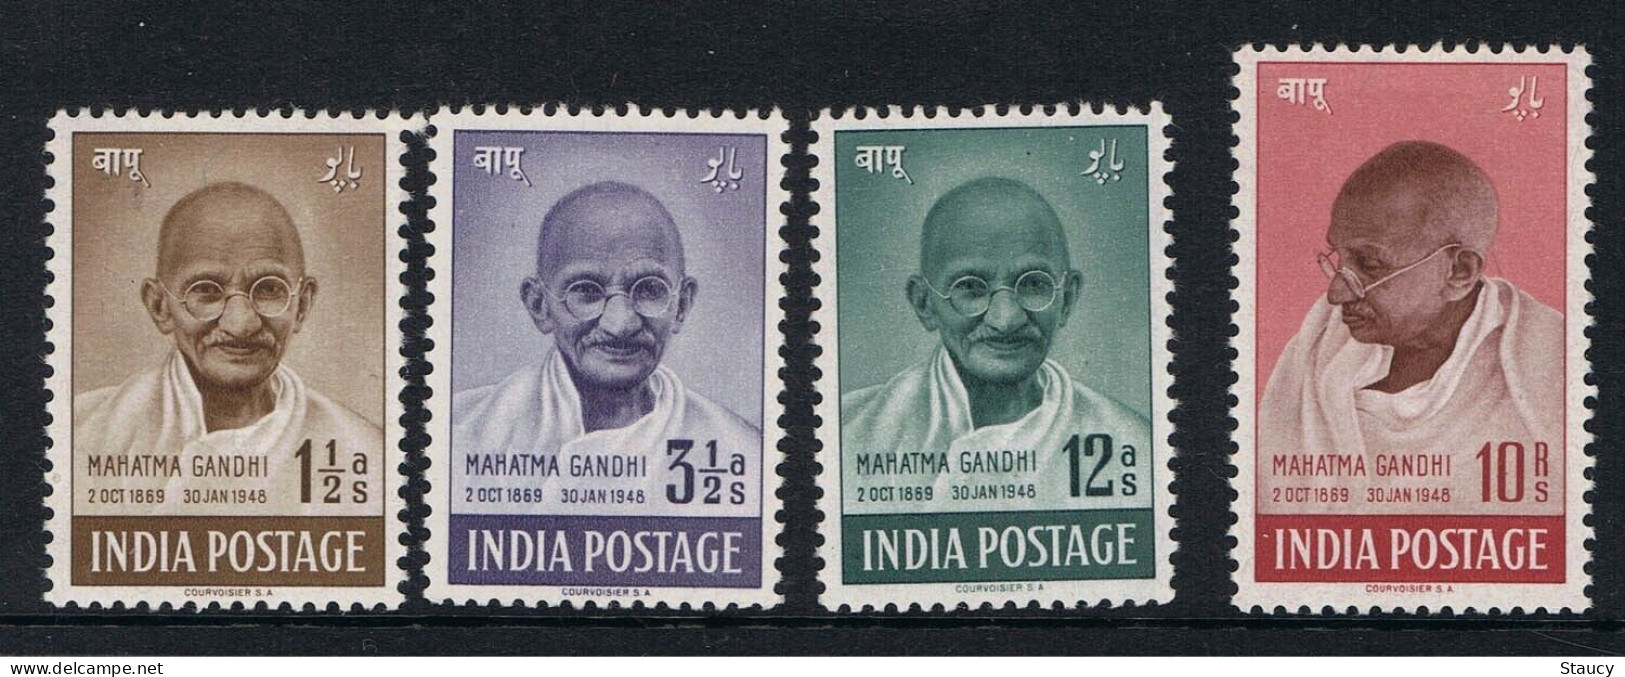 India 1948 Mahatma Gandhi Mourning 4v SET Mounted Mint Uneven Back, NICE COLOUR As Per Scan - Nuovi